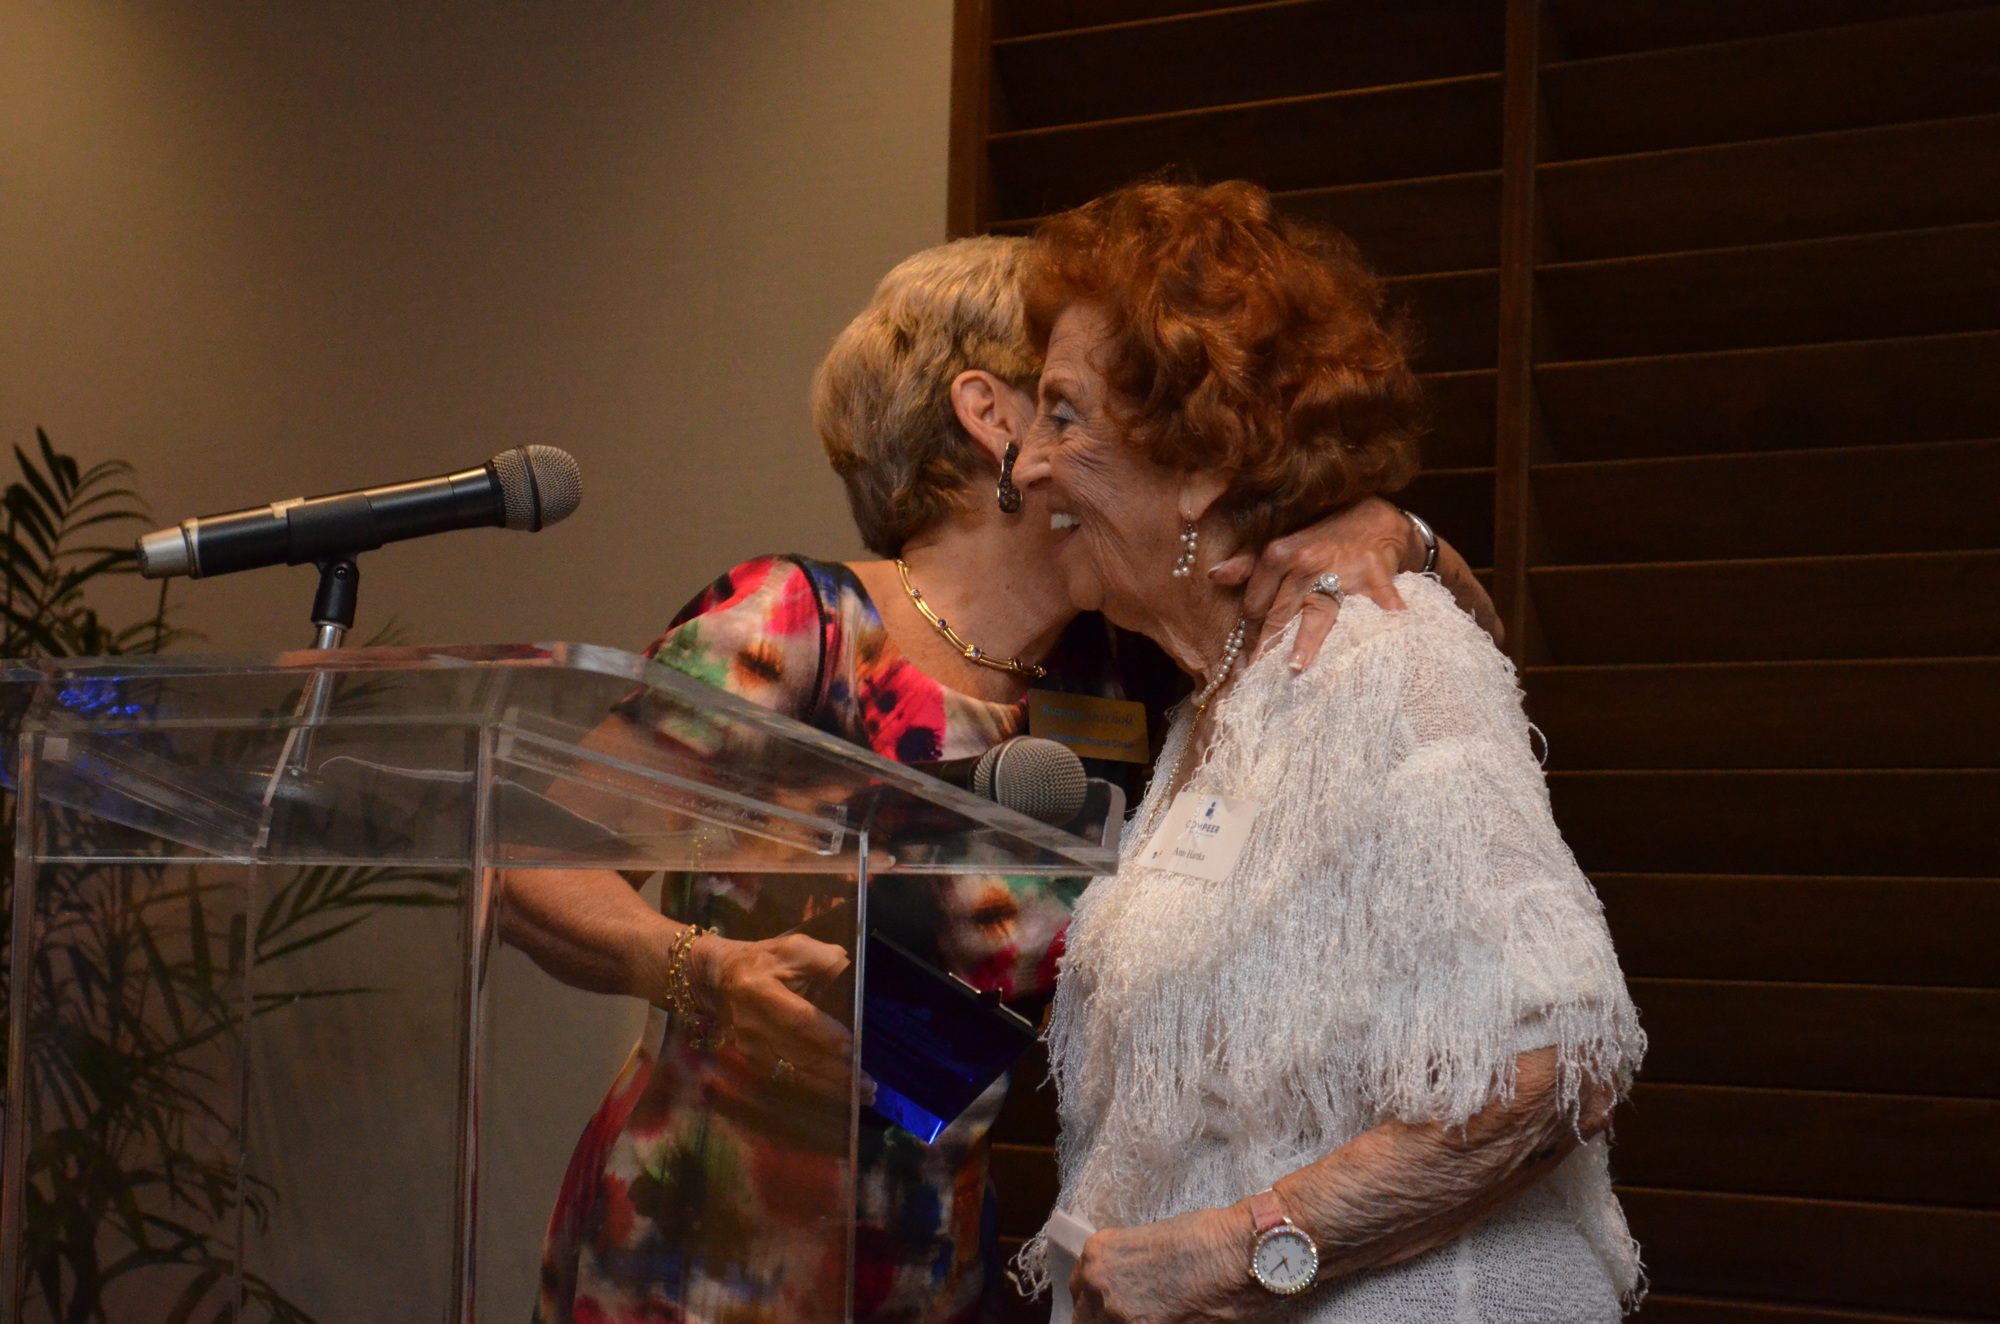 Skirboll embraces Hartka after awarding her with the Bernice “Bunny” Skirboll Award for Outstanding Compeer Board Member for the year of 2015 at the 5-year anniversary celebration luncheon on March 31, 2016 at The Francis. Photo by Amanda Morales.